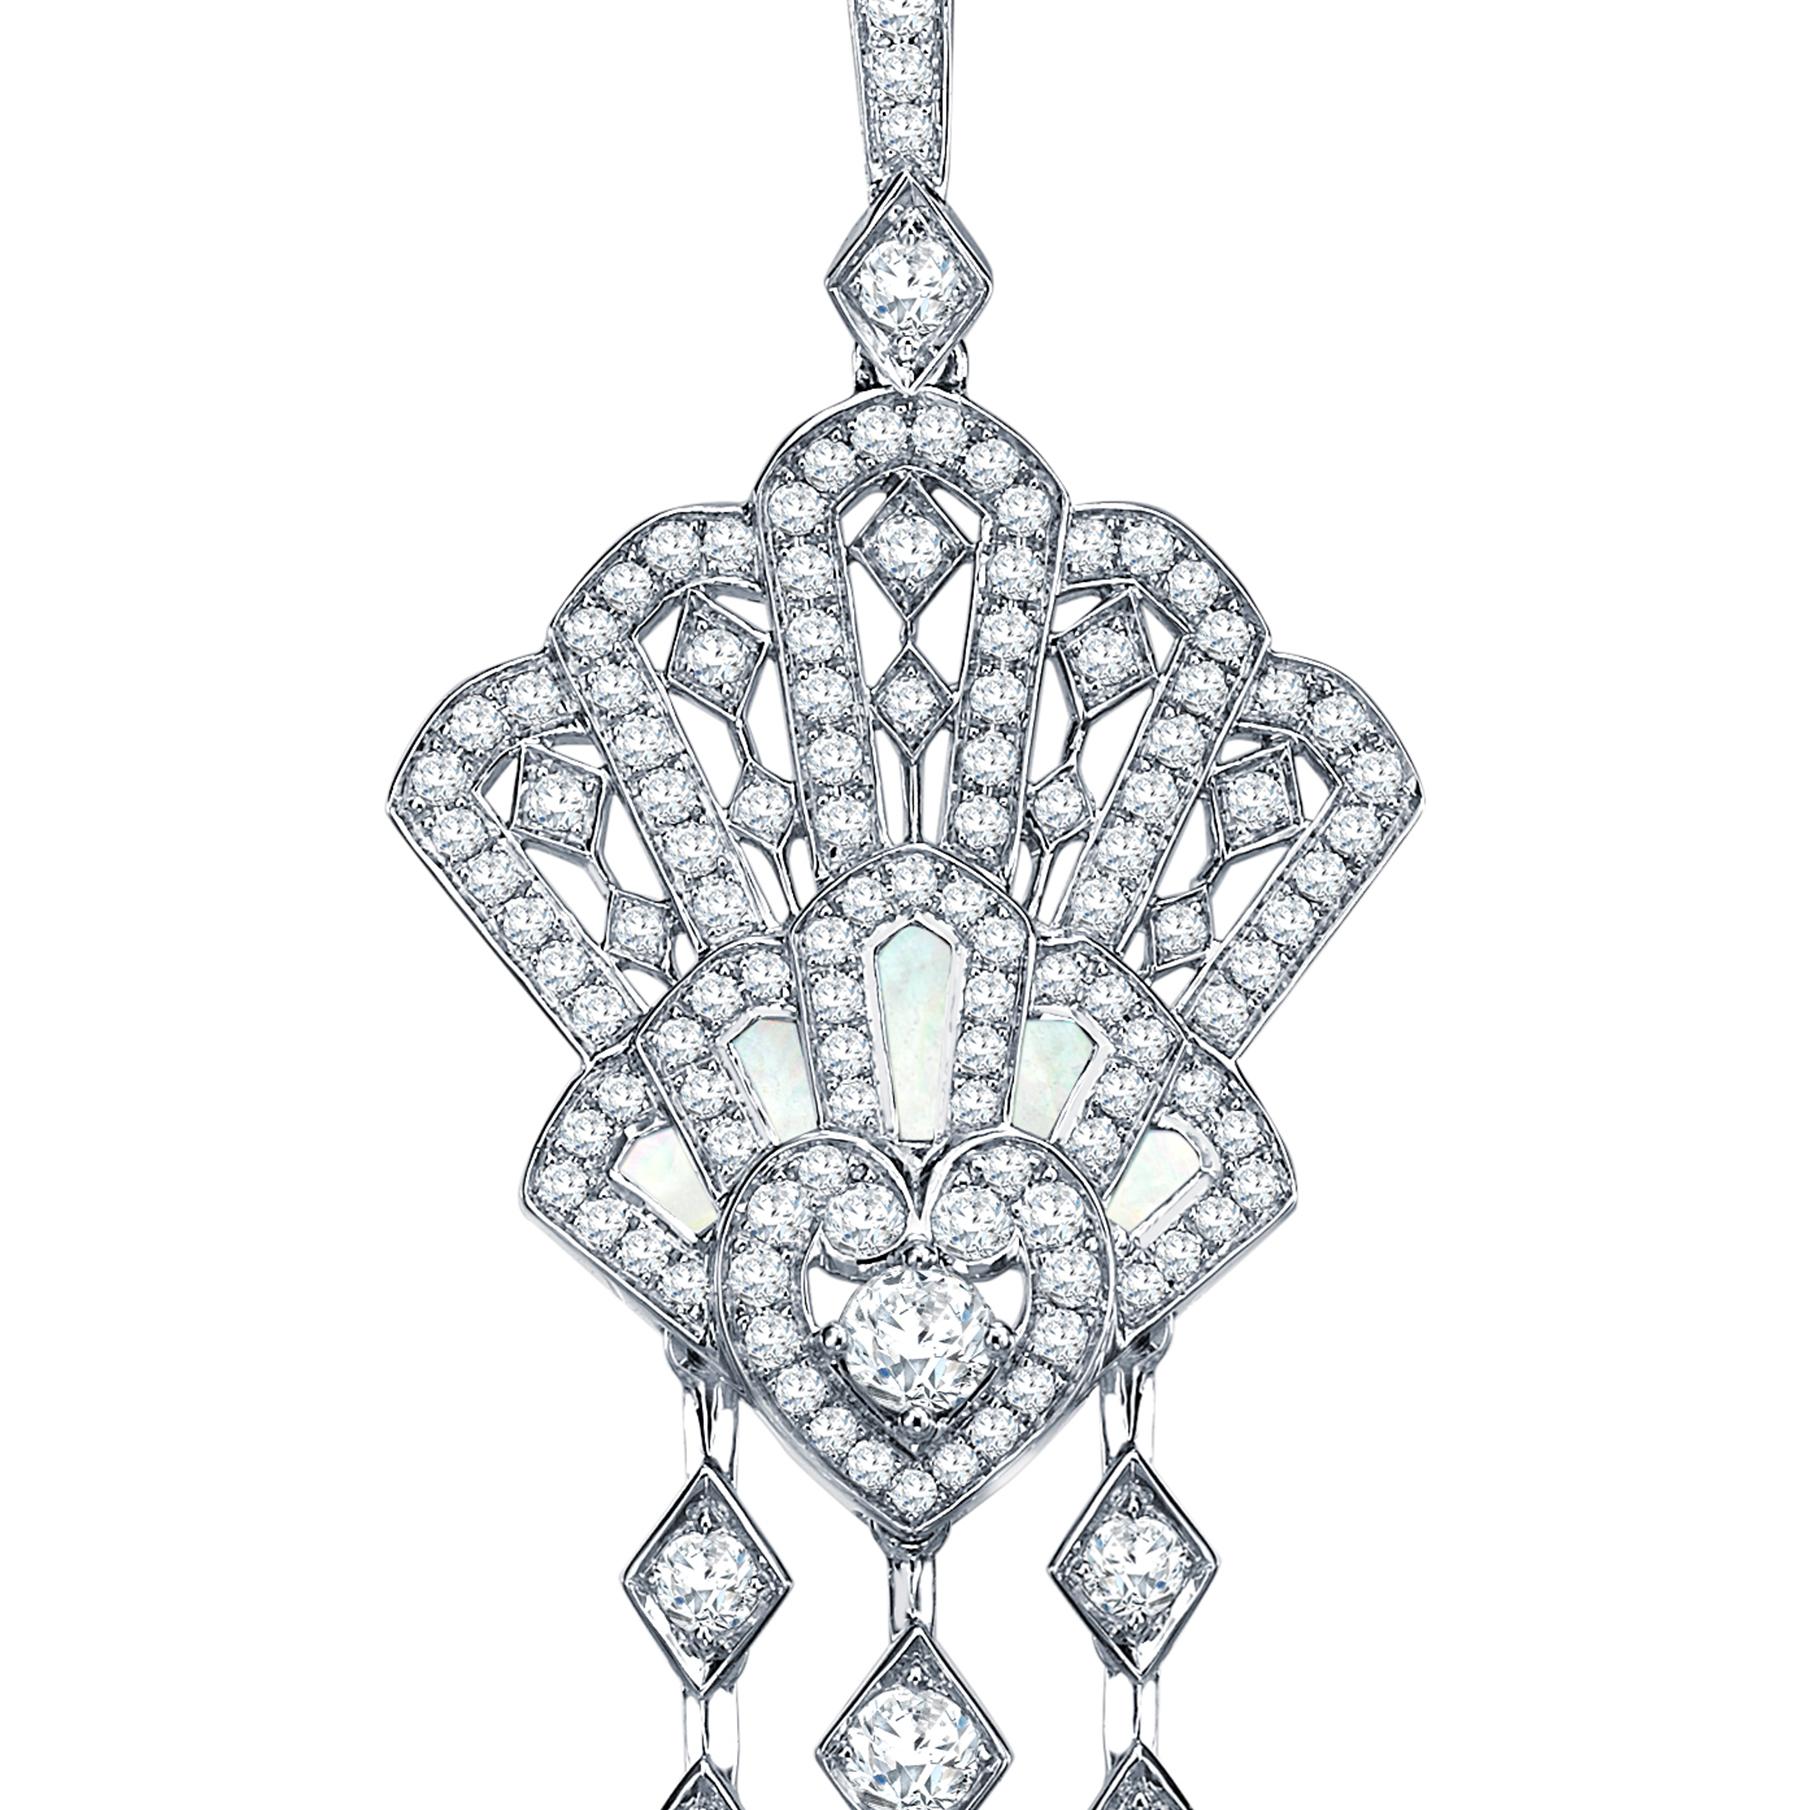 The perfect bridal gift that is beautiful and elegant. 
A pair of 18 karat white gold chandelier earrings from The House of Garrard Fanfare collection set with 346 round white diamonds weighing 5.16 carats and 10 calibre cut mother of pearl weighing